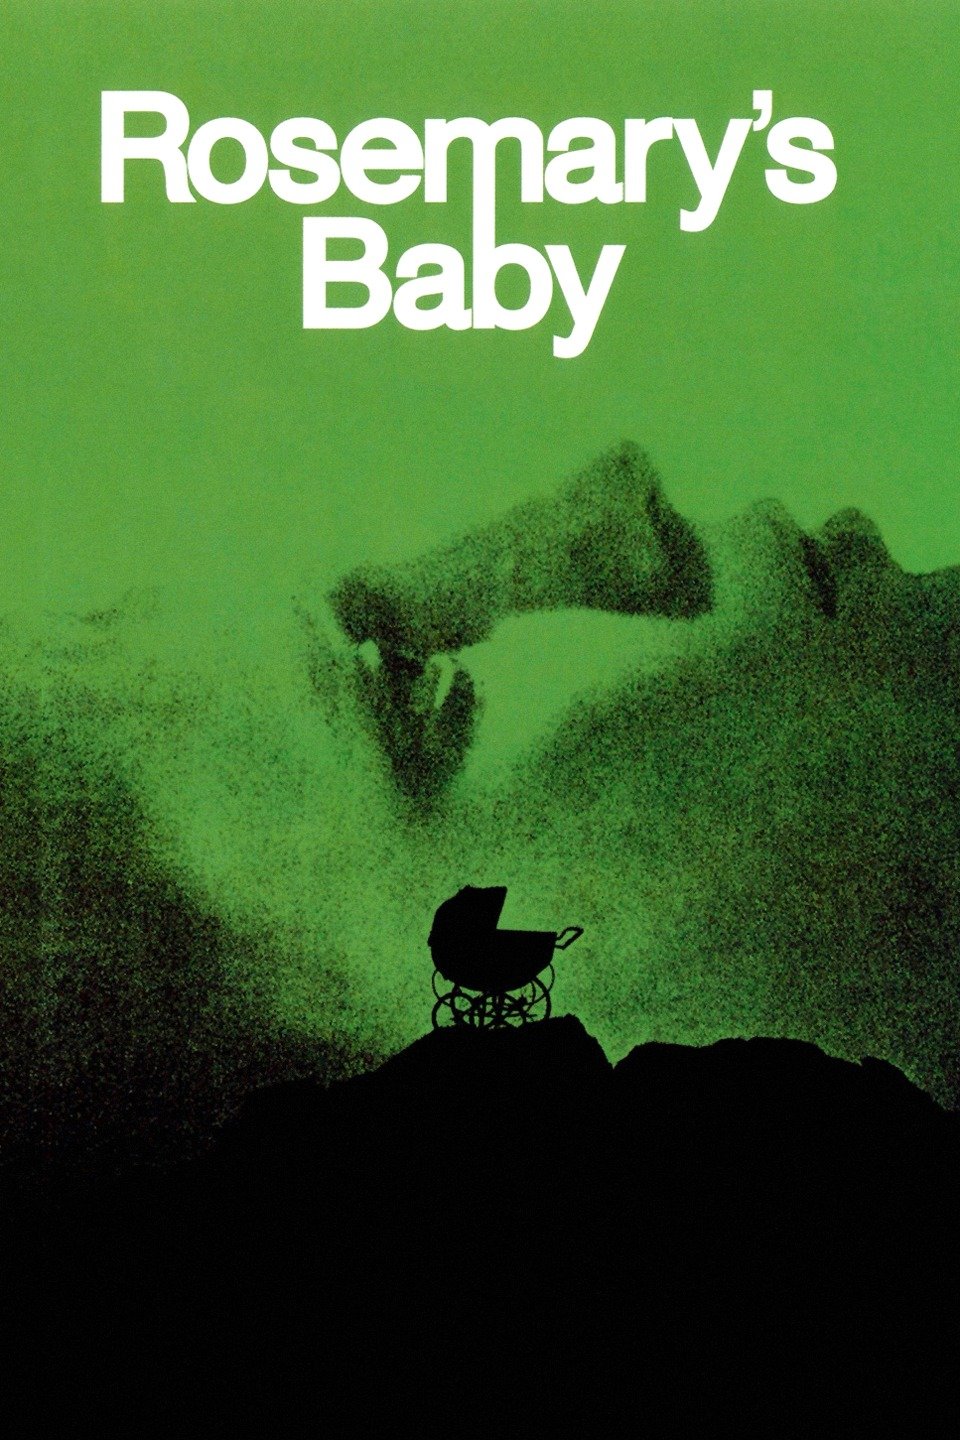 Rosemary's Baby - Top 25 Horror Movies of All Time